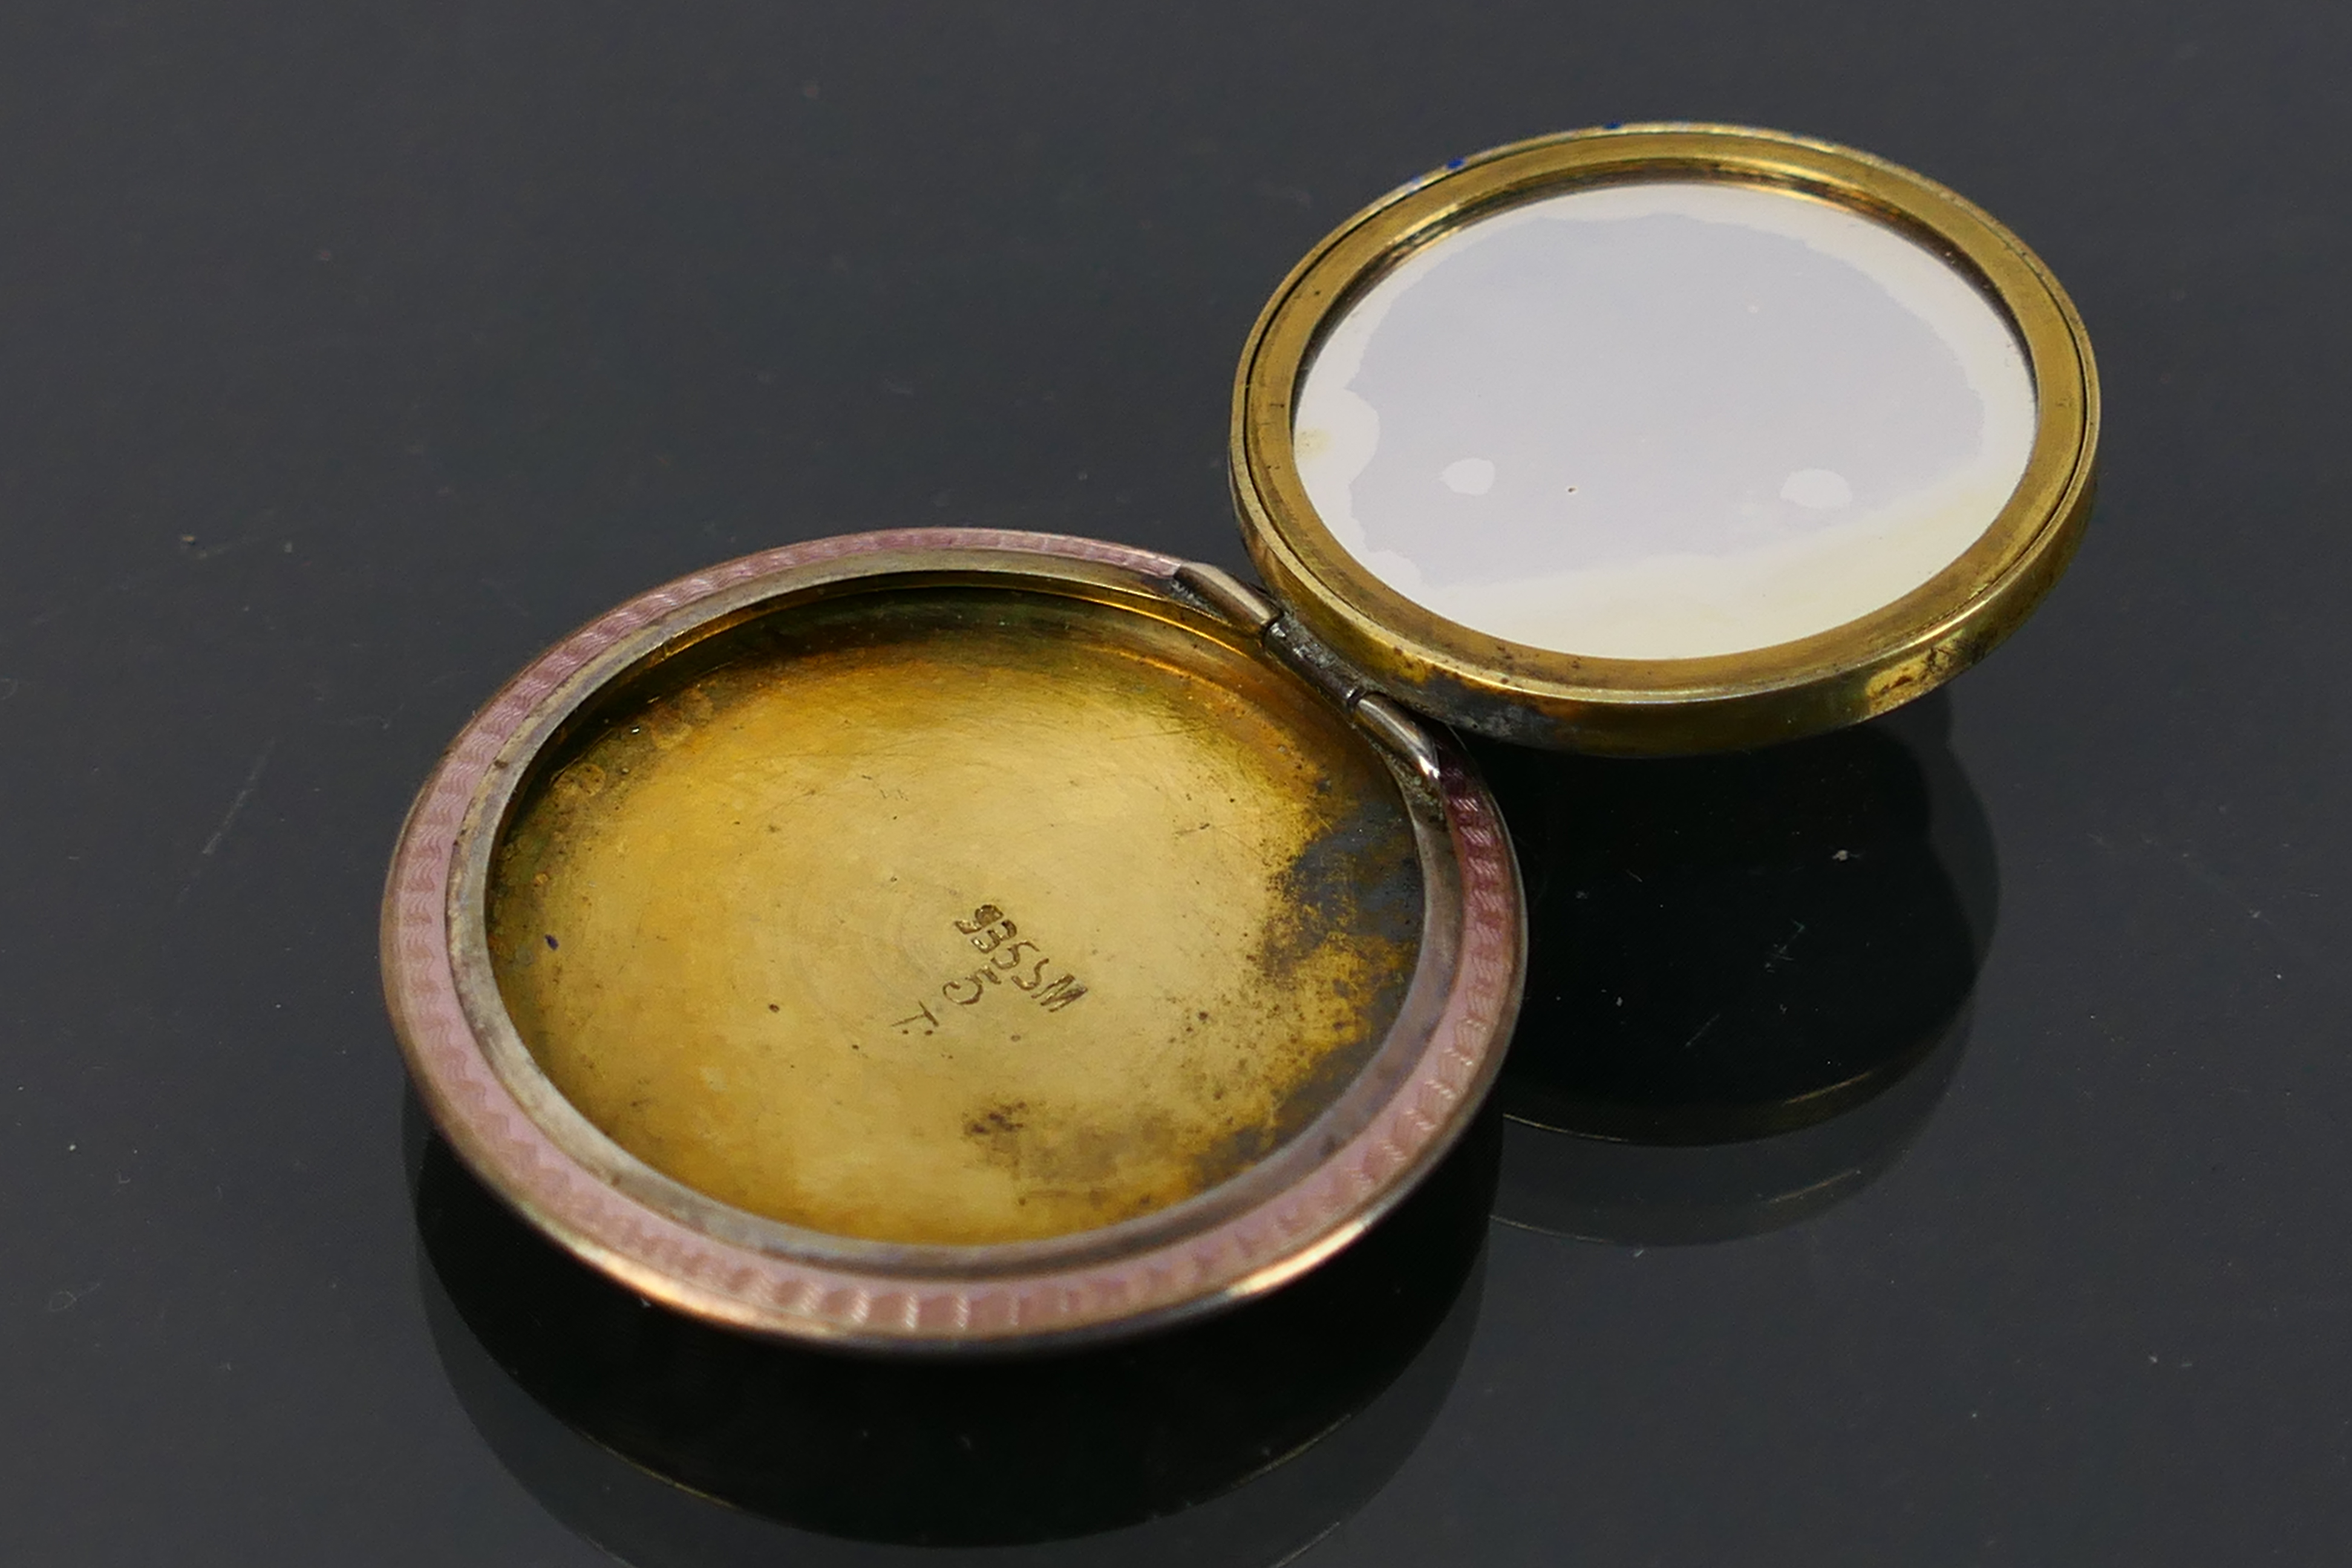 A miniature guilloche enamel powder compact, covered front and back in pale pink enamel. - Image 5 of 6